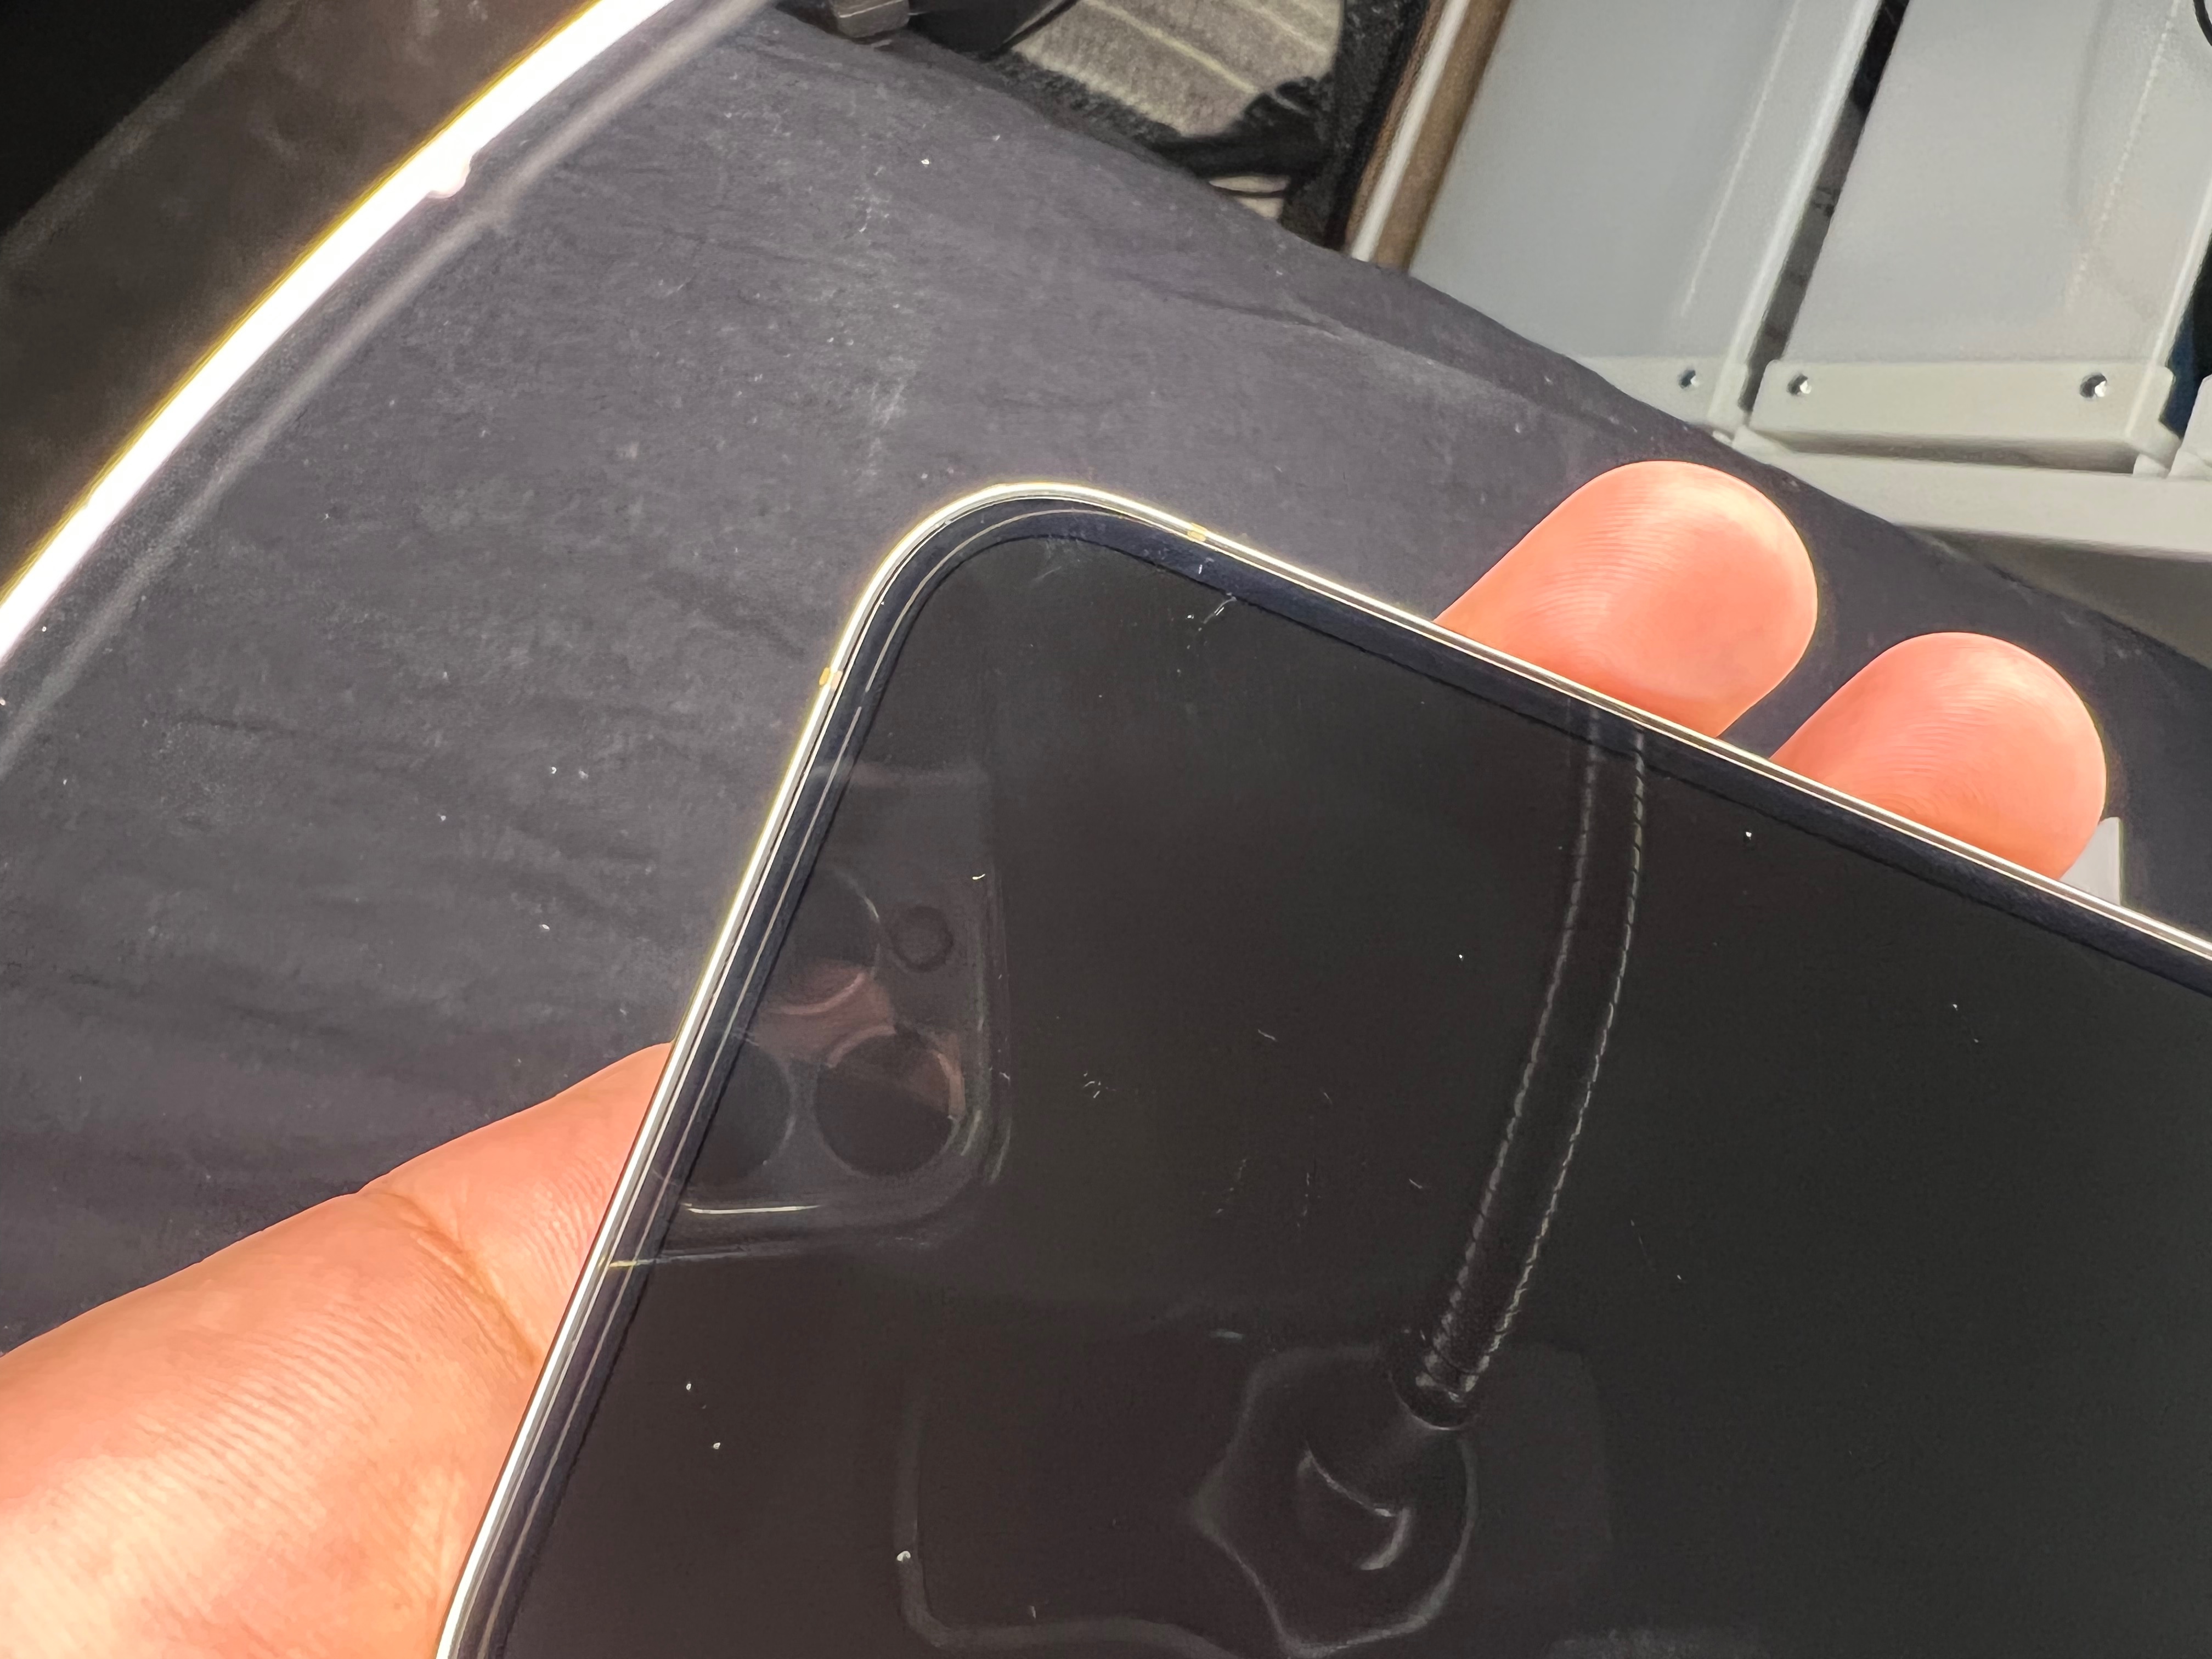 Removing scratches on the display of mobile devices 